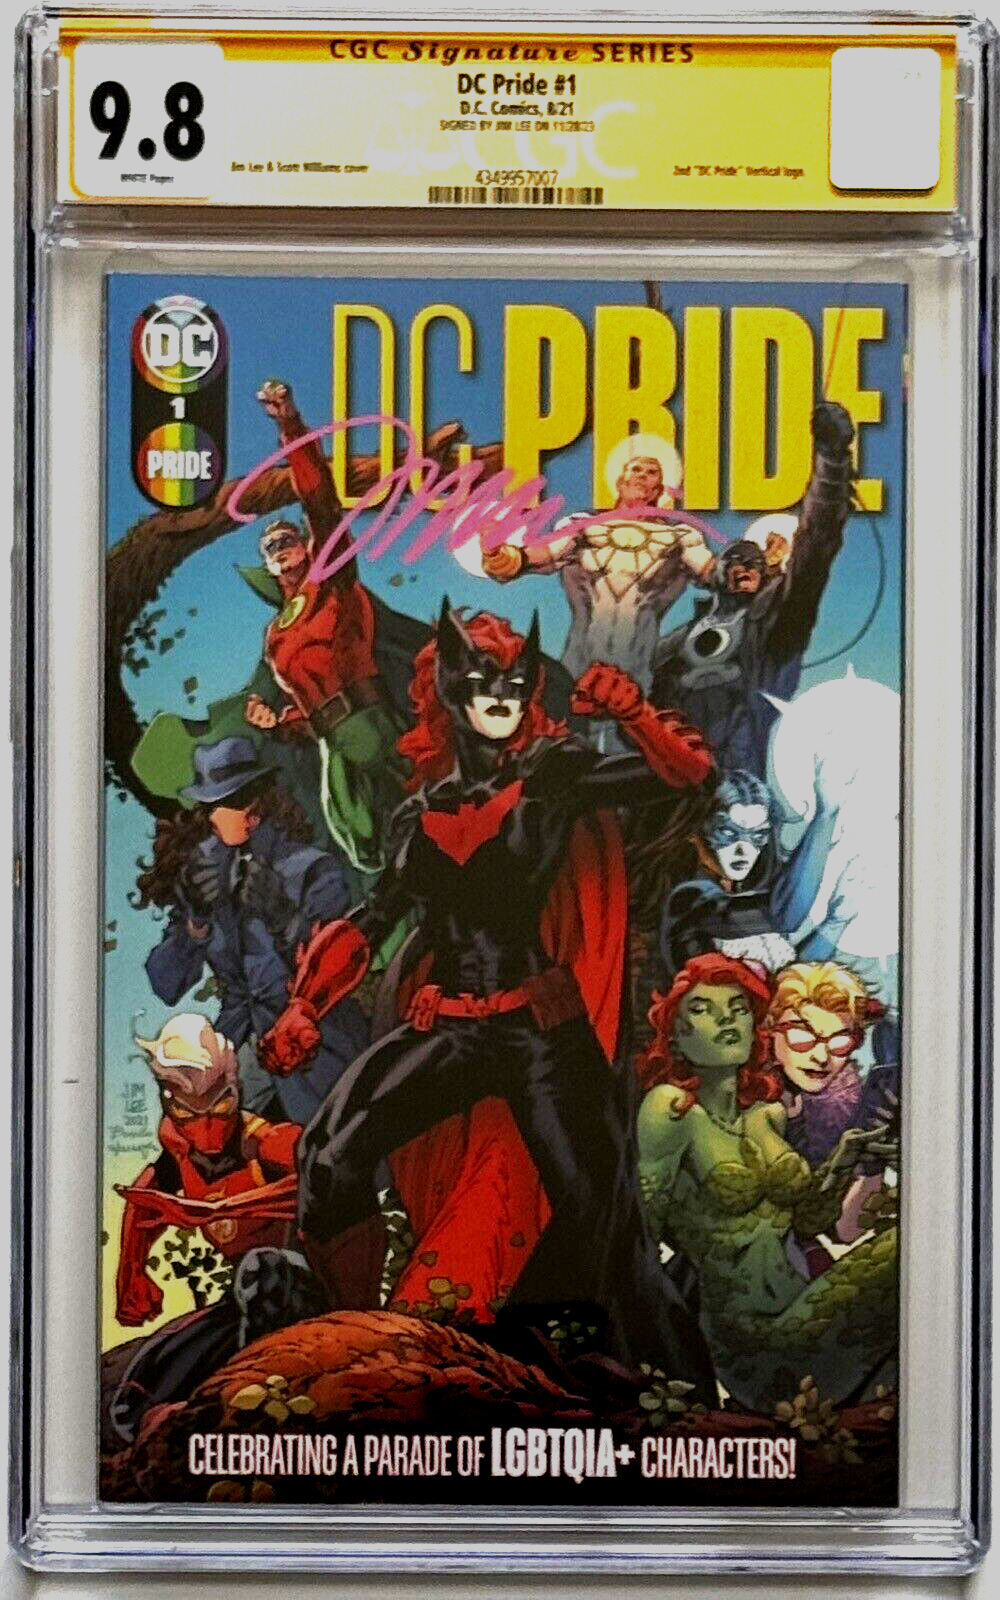 DC PRIDE 2021 CGC 9.8 SS PINK Signature by Jim Lee - KEY 1st Appearance DREAMER